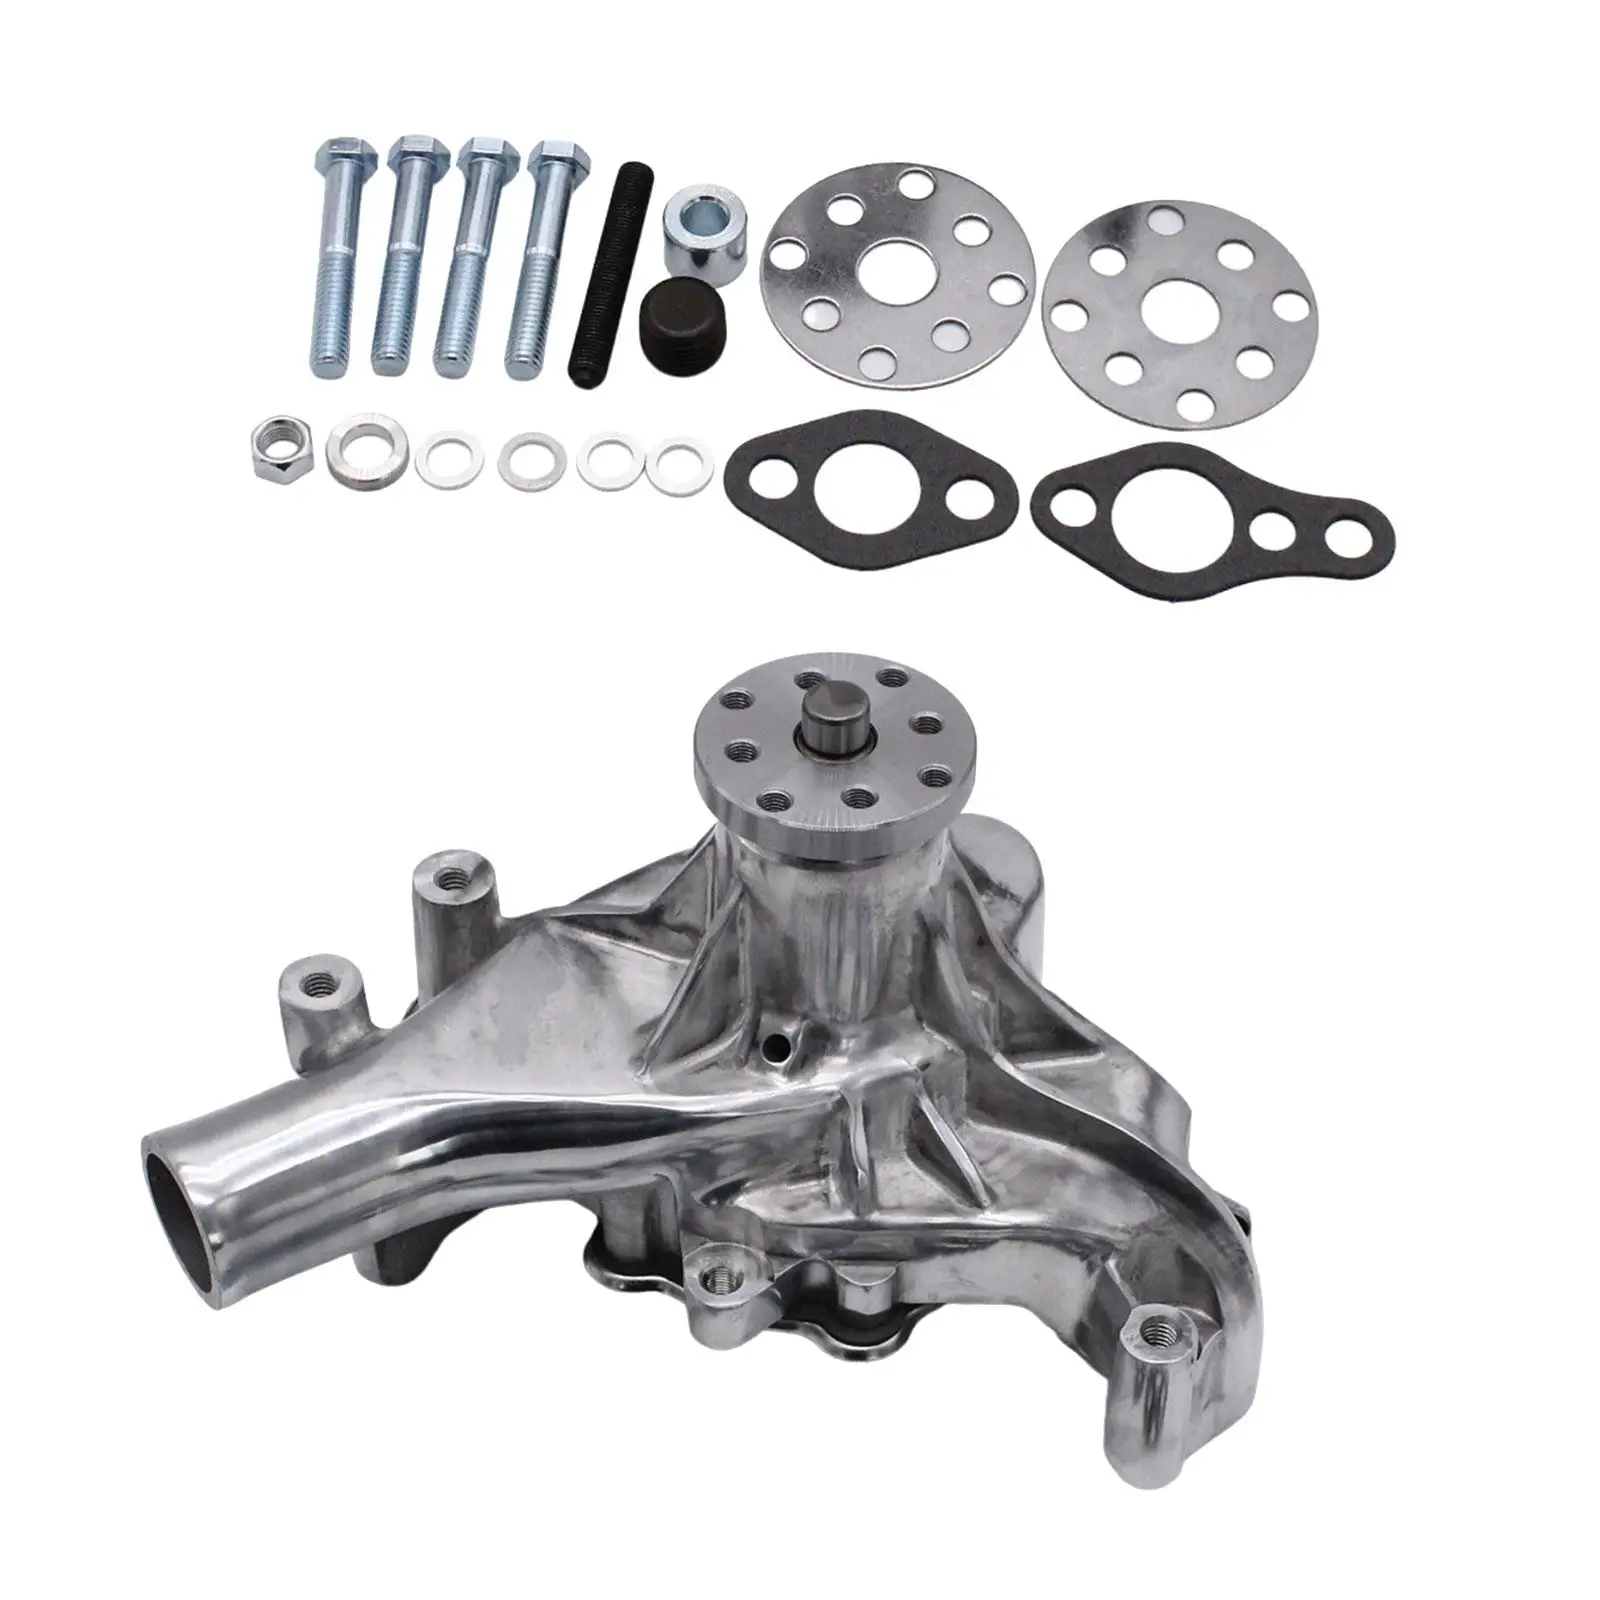 Water Pump Long Chrome Durable Automotive for Chevy 283 327 350 383 Sbc